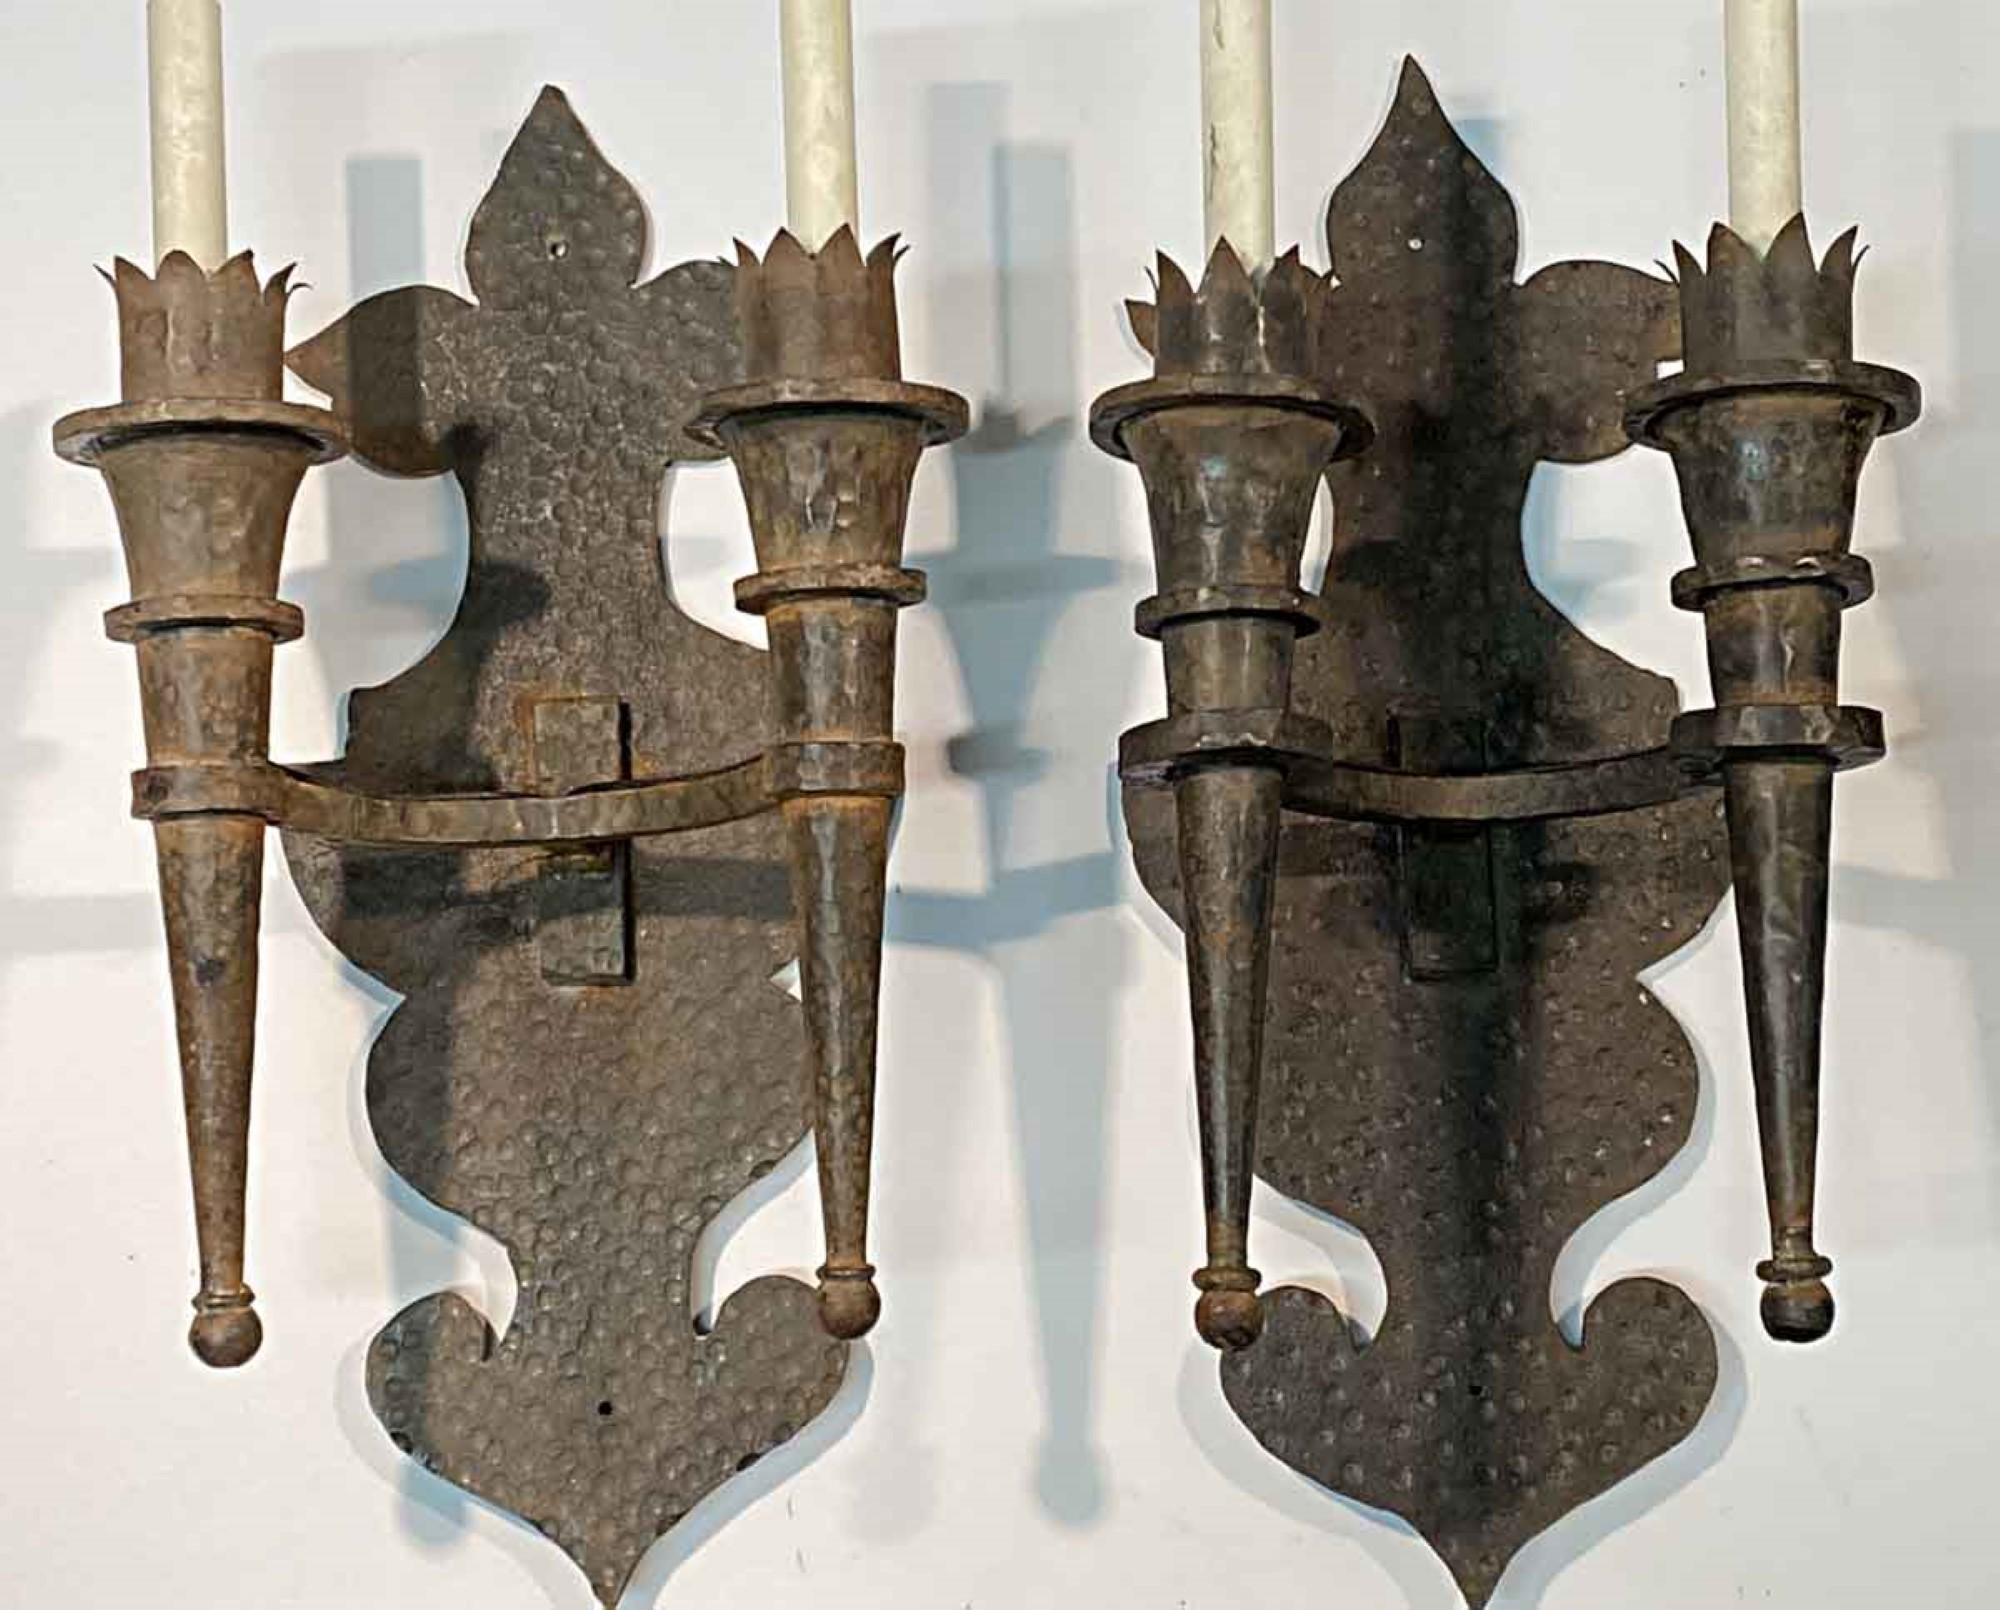 1890s over sized hand hammered wrought iron sconces with torch two light arms. From France. Price includes restoration. This can be viewed at our Scranton, Pennsylvania location. Please inquire for the exact address.